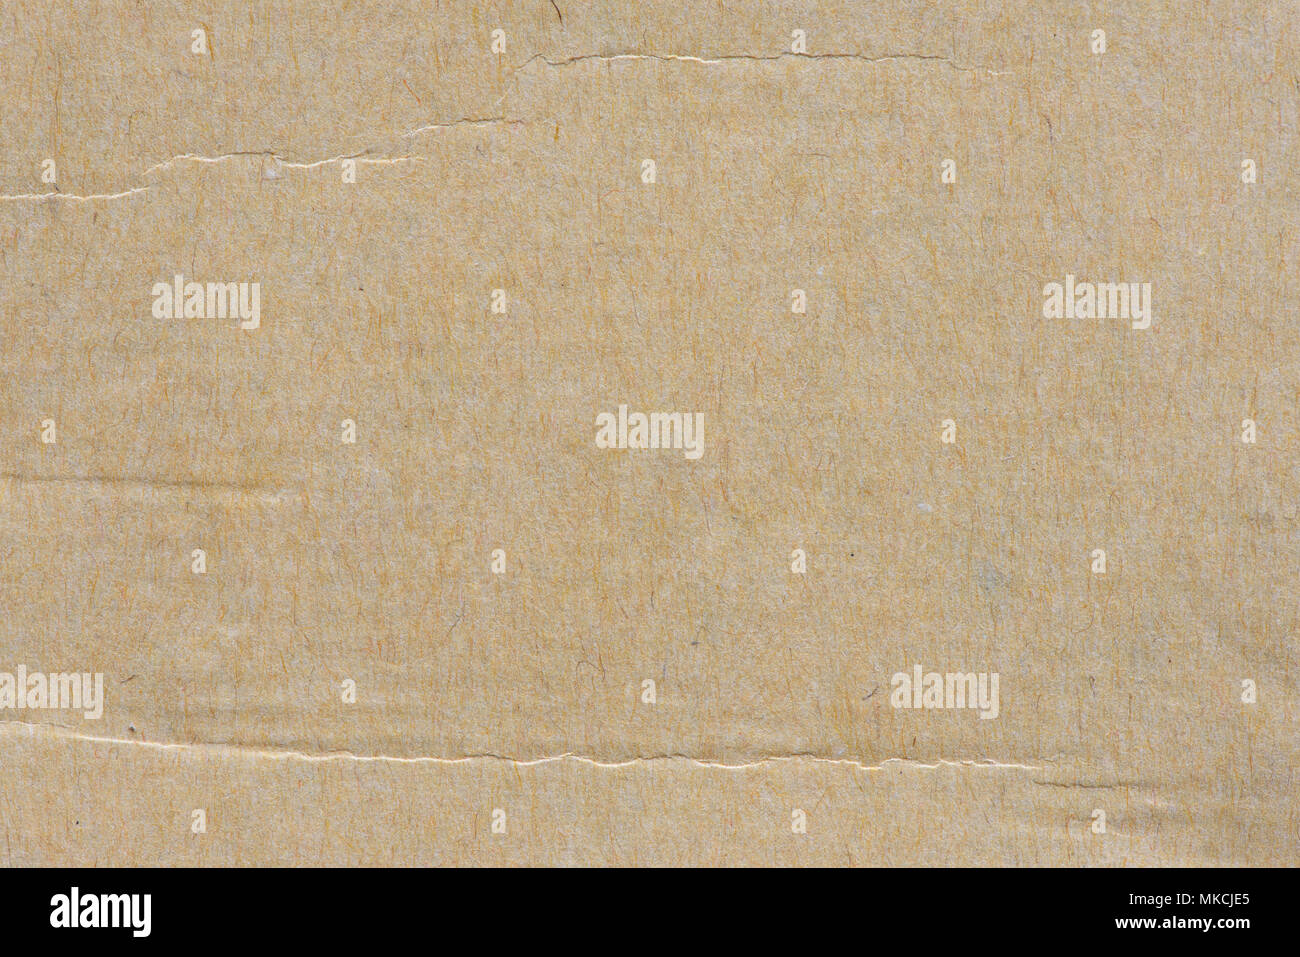 Close Up Texture Or Background Of Brown Cardboard Paper, Craft